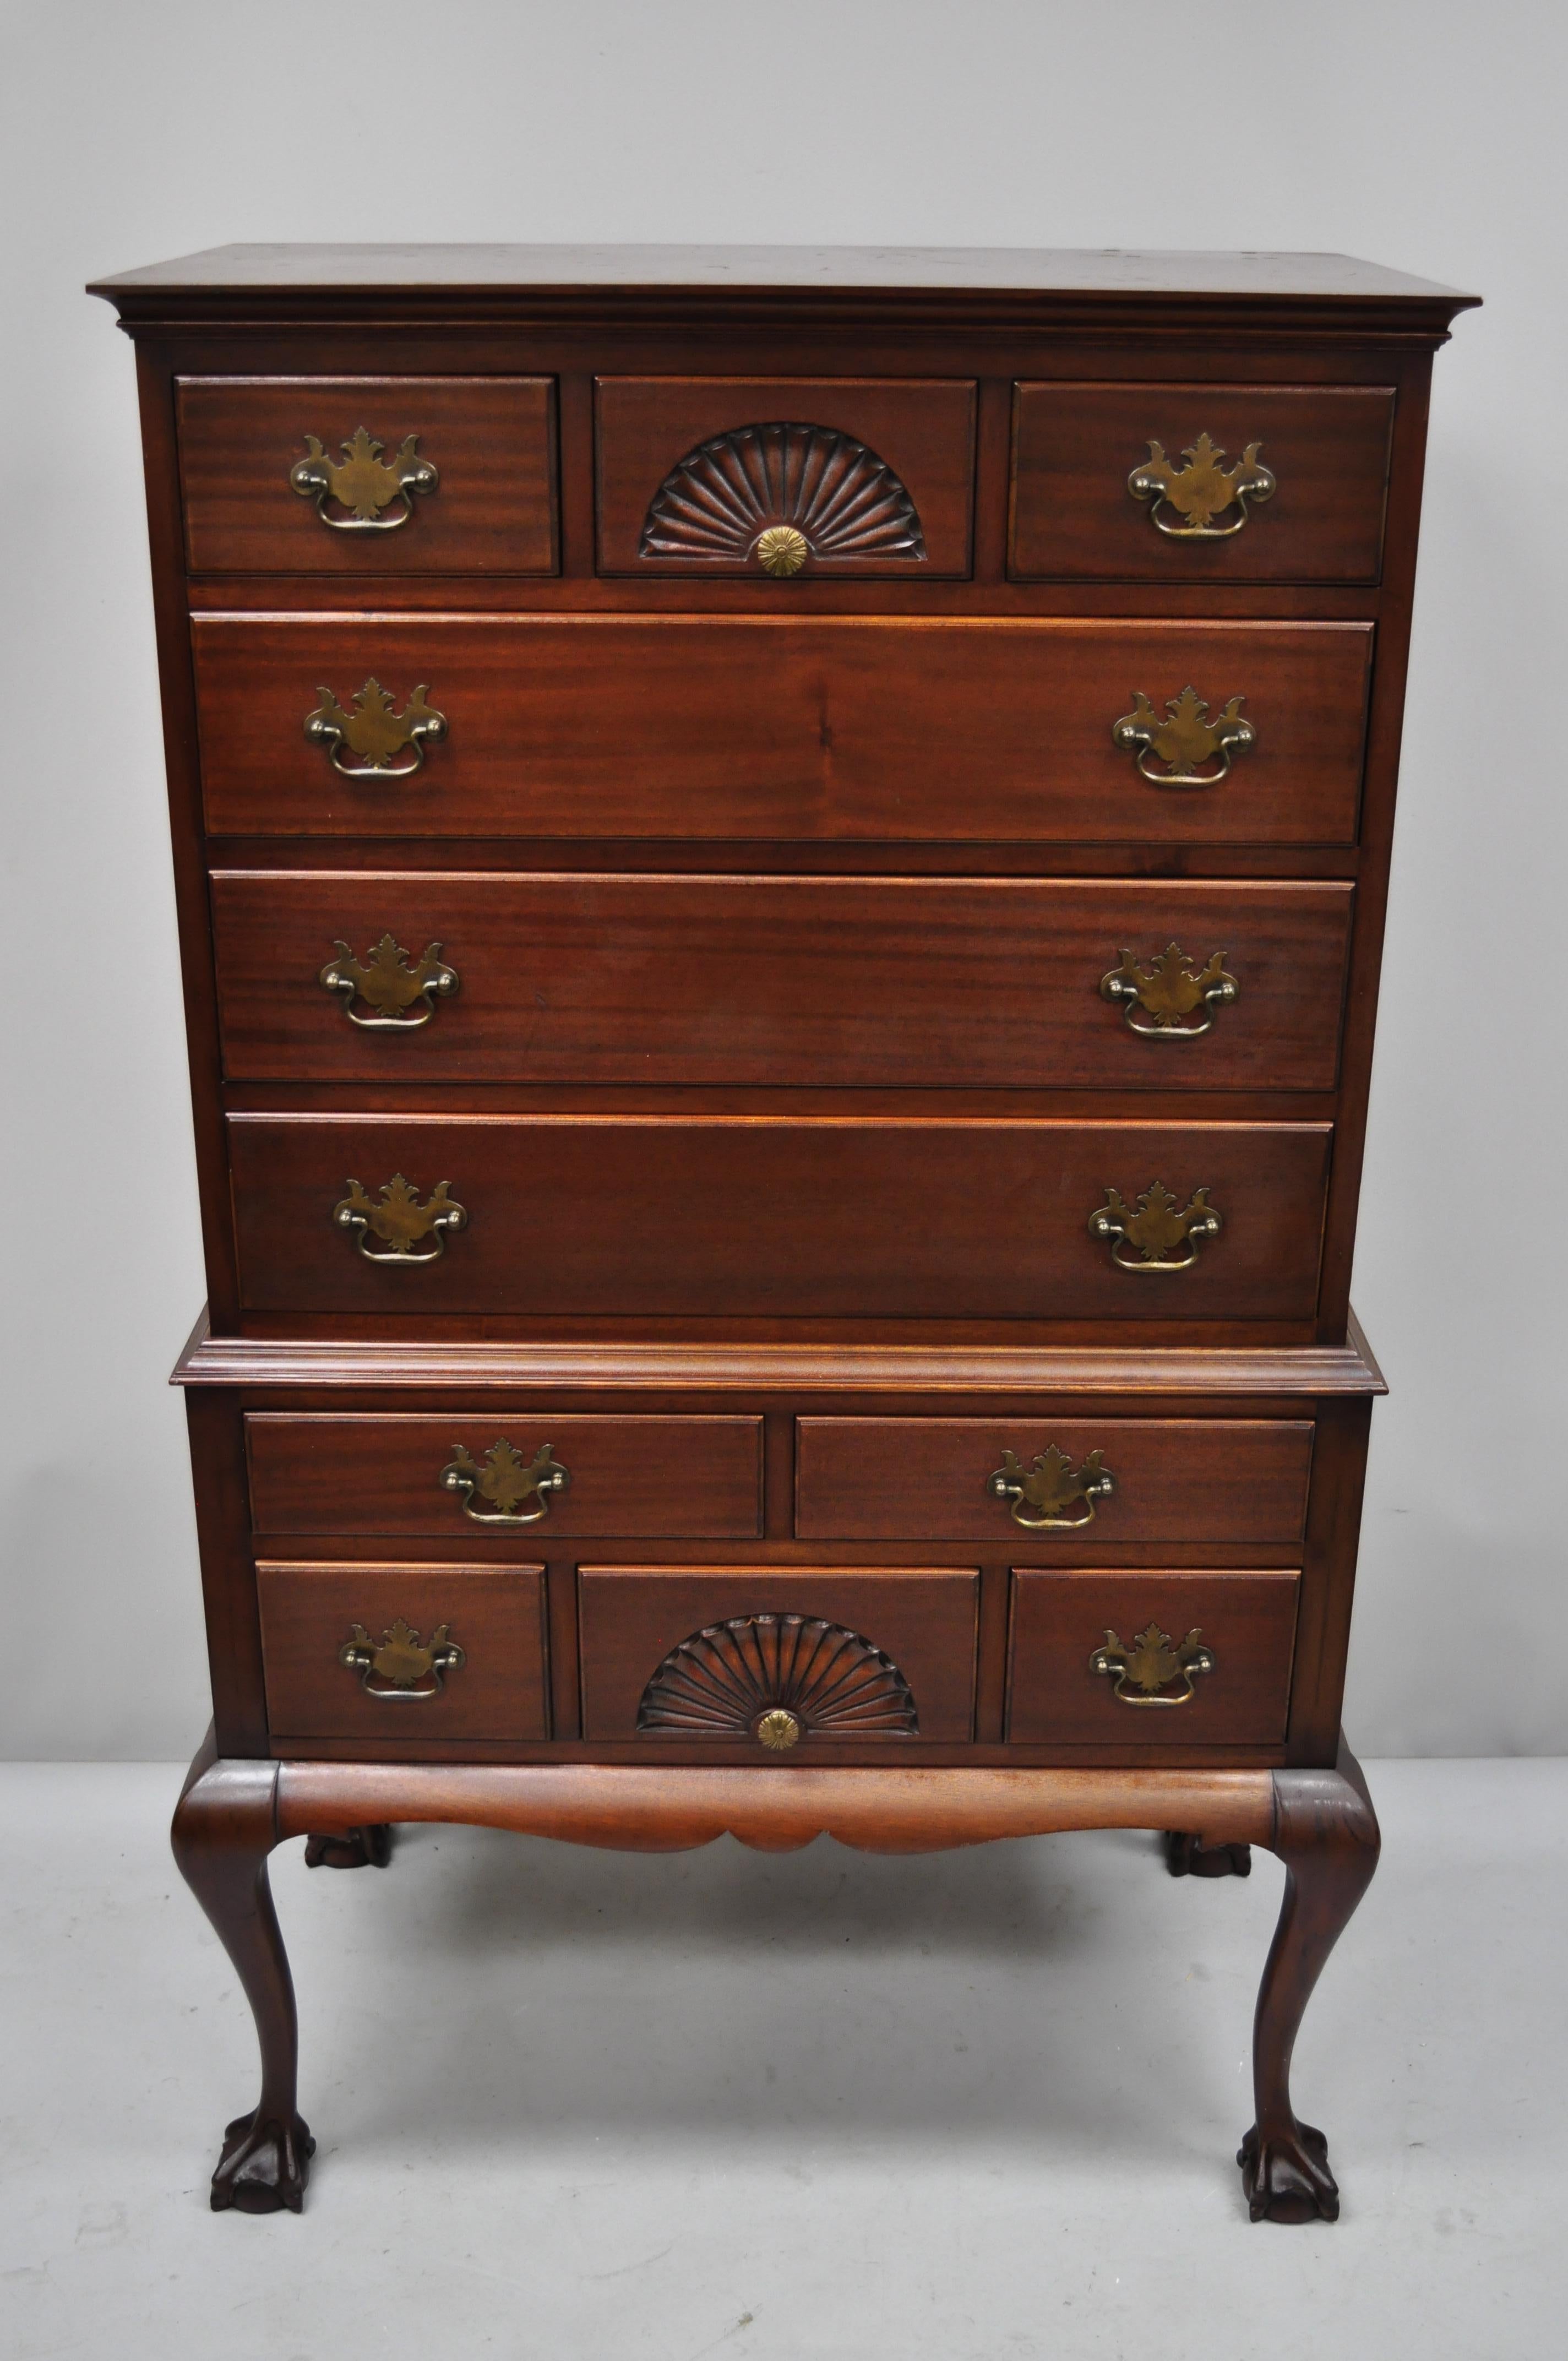 W.A. Hathaway mahogany ball and claw Chippendale style highboy tall chest dresser. Item features beautiful wood grain, original label, 11 dovetailed drawers, carved ball and claw feet, solid brass hardware, quality American craftsmanship, circa